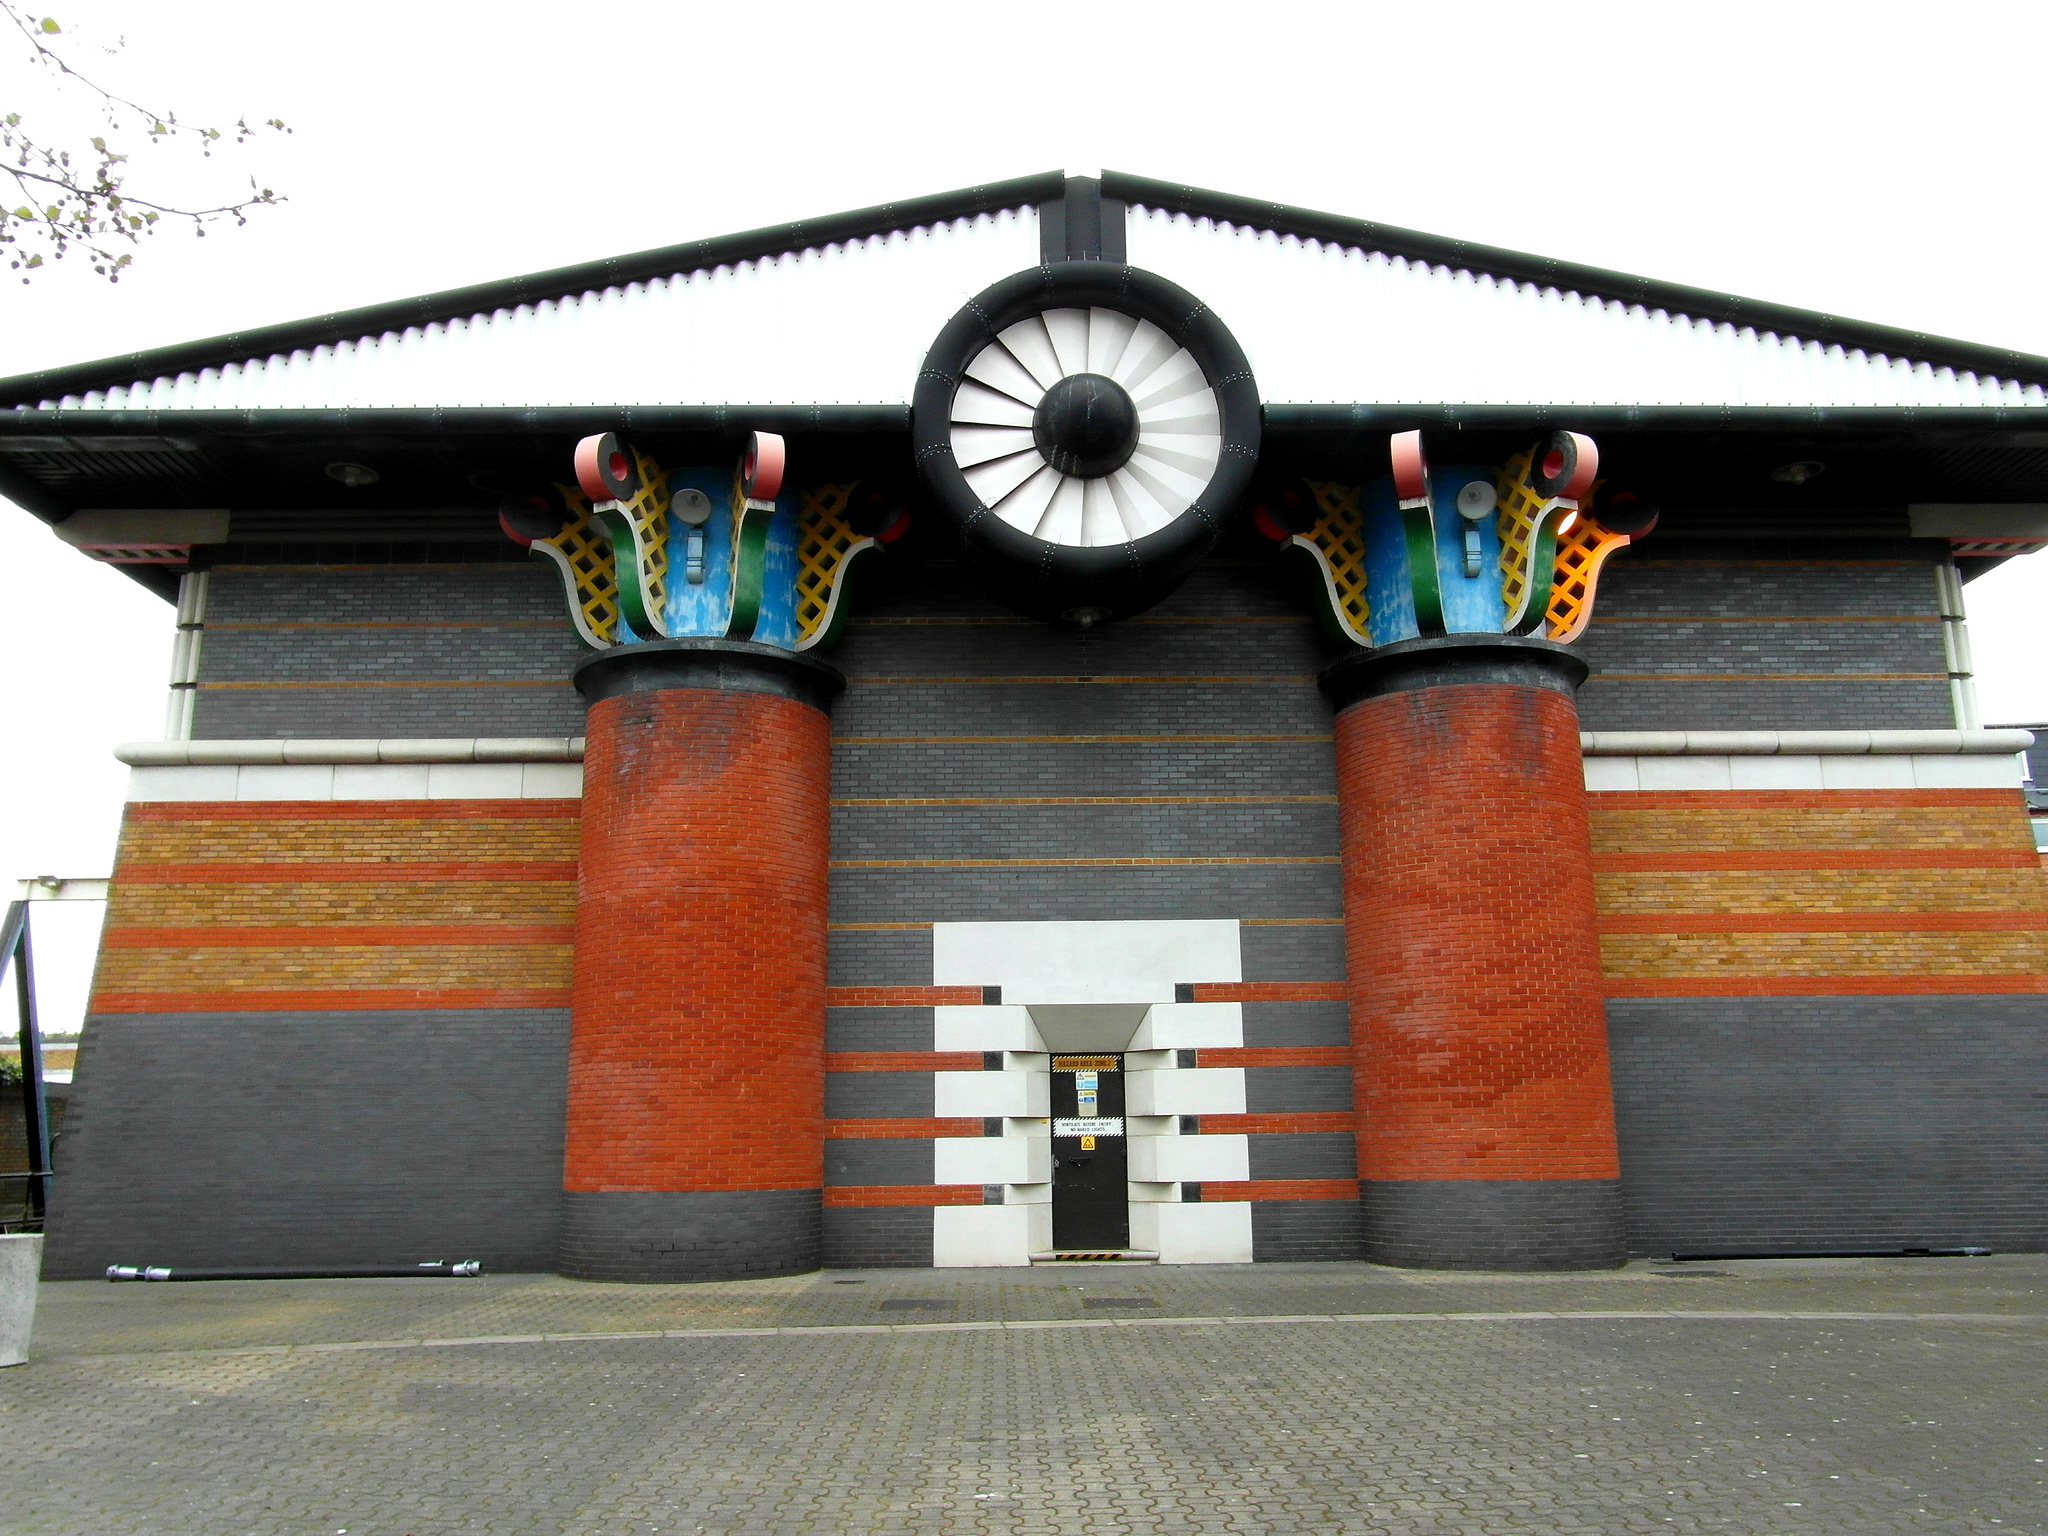 John Outram's pumping station in the Docklands, London